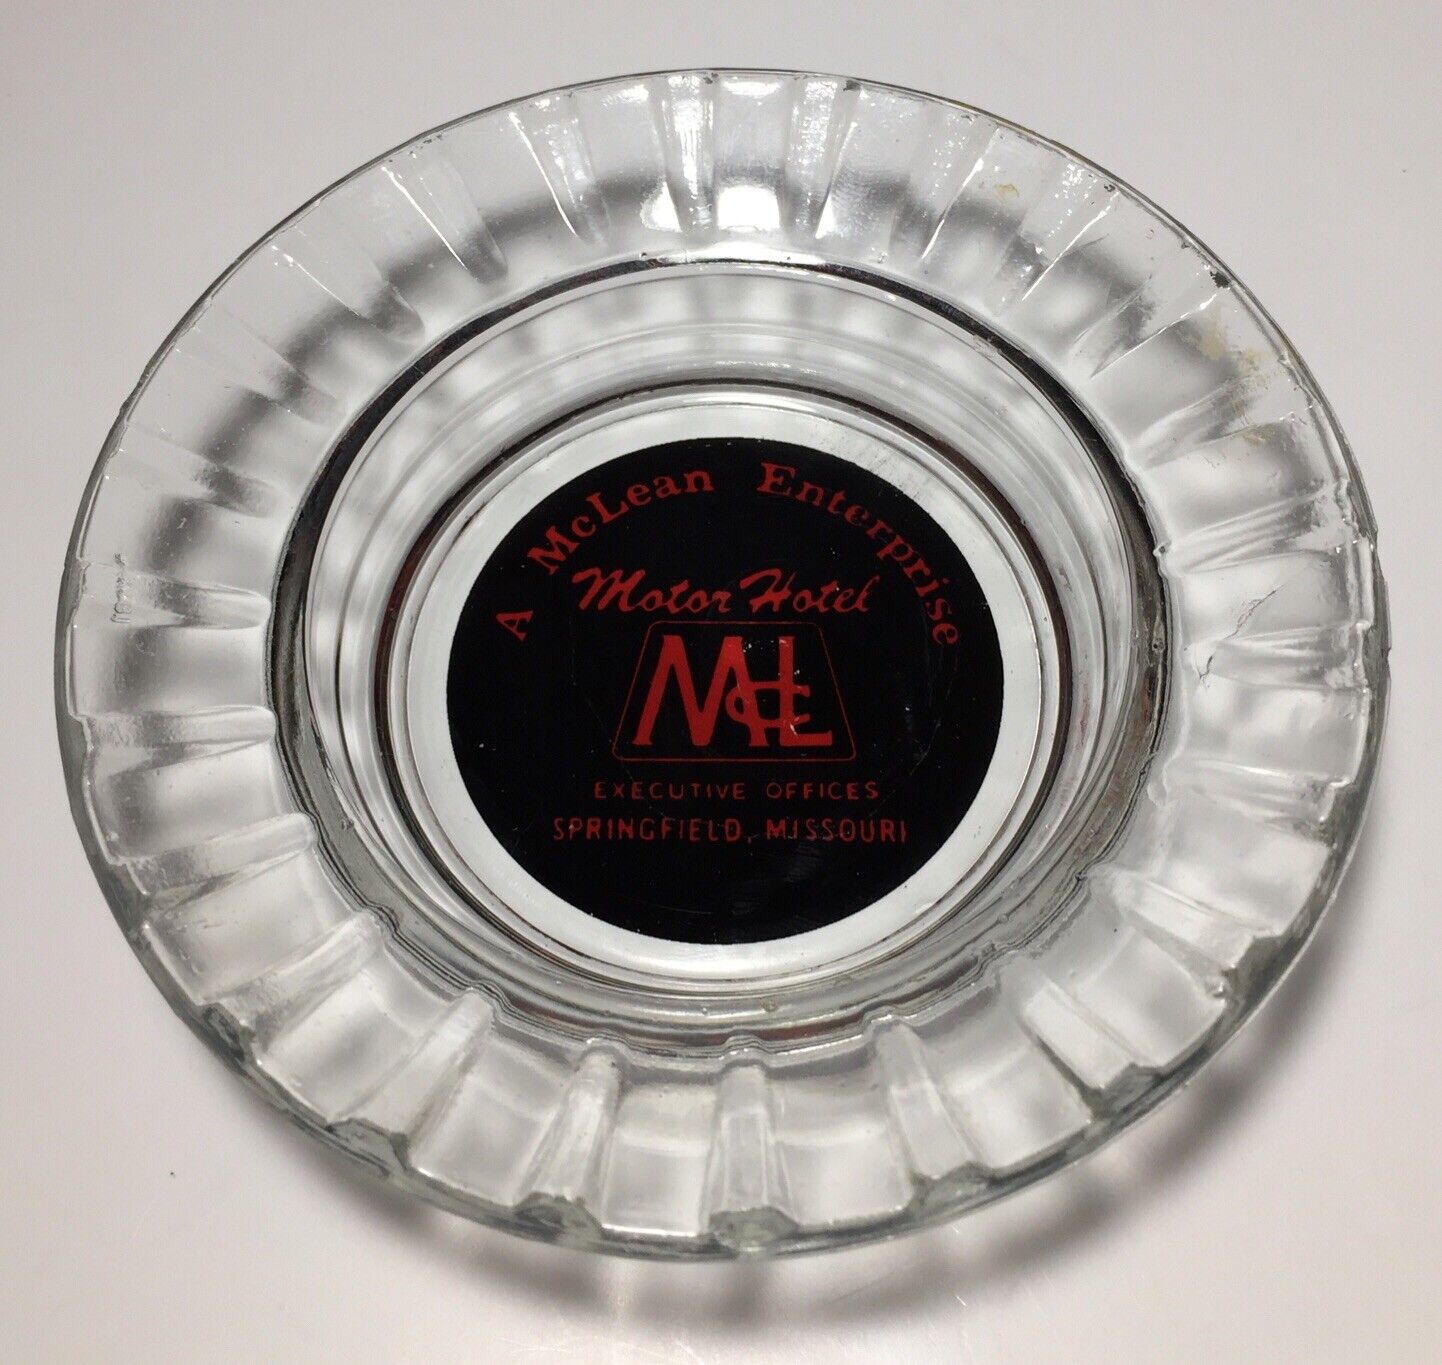 Vintage A Mclean Enterprise Motor Hotel Springfield MO Round Clear Glass Ashtray